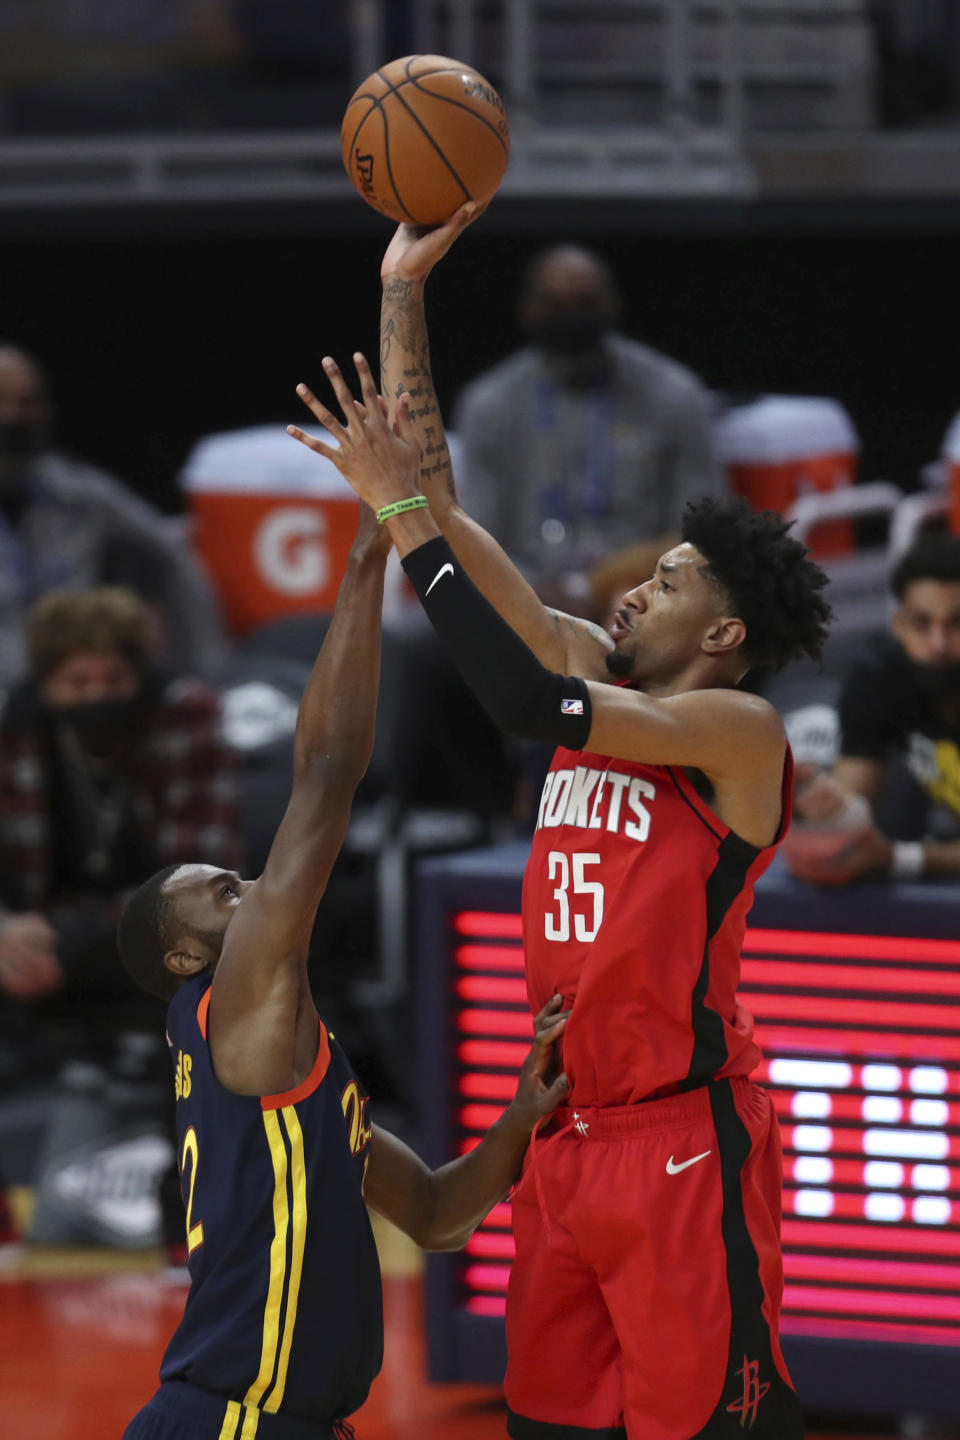 Houston Rockets center Christian Wood, right, shoots over Golden State Warriors forward Andrew Wiggins during the second half of an NBA basketball game in San Francisco, Saturday, April 10, 2021. (AP Photo/Jed Jacobsohn)